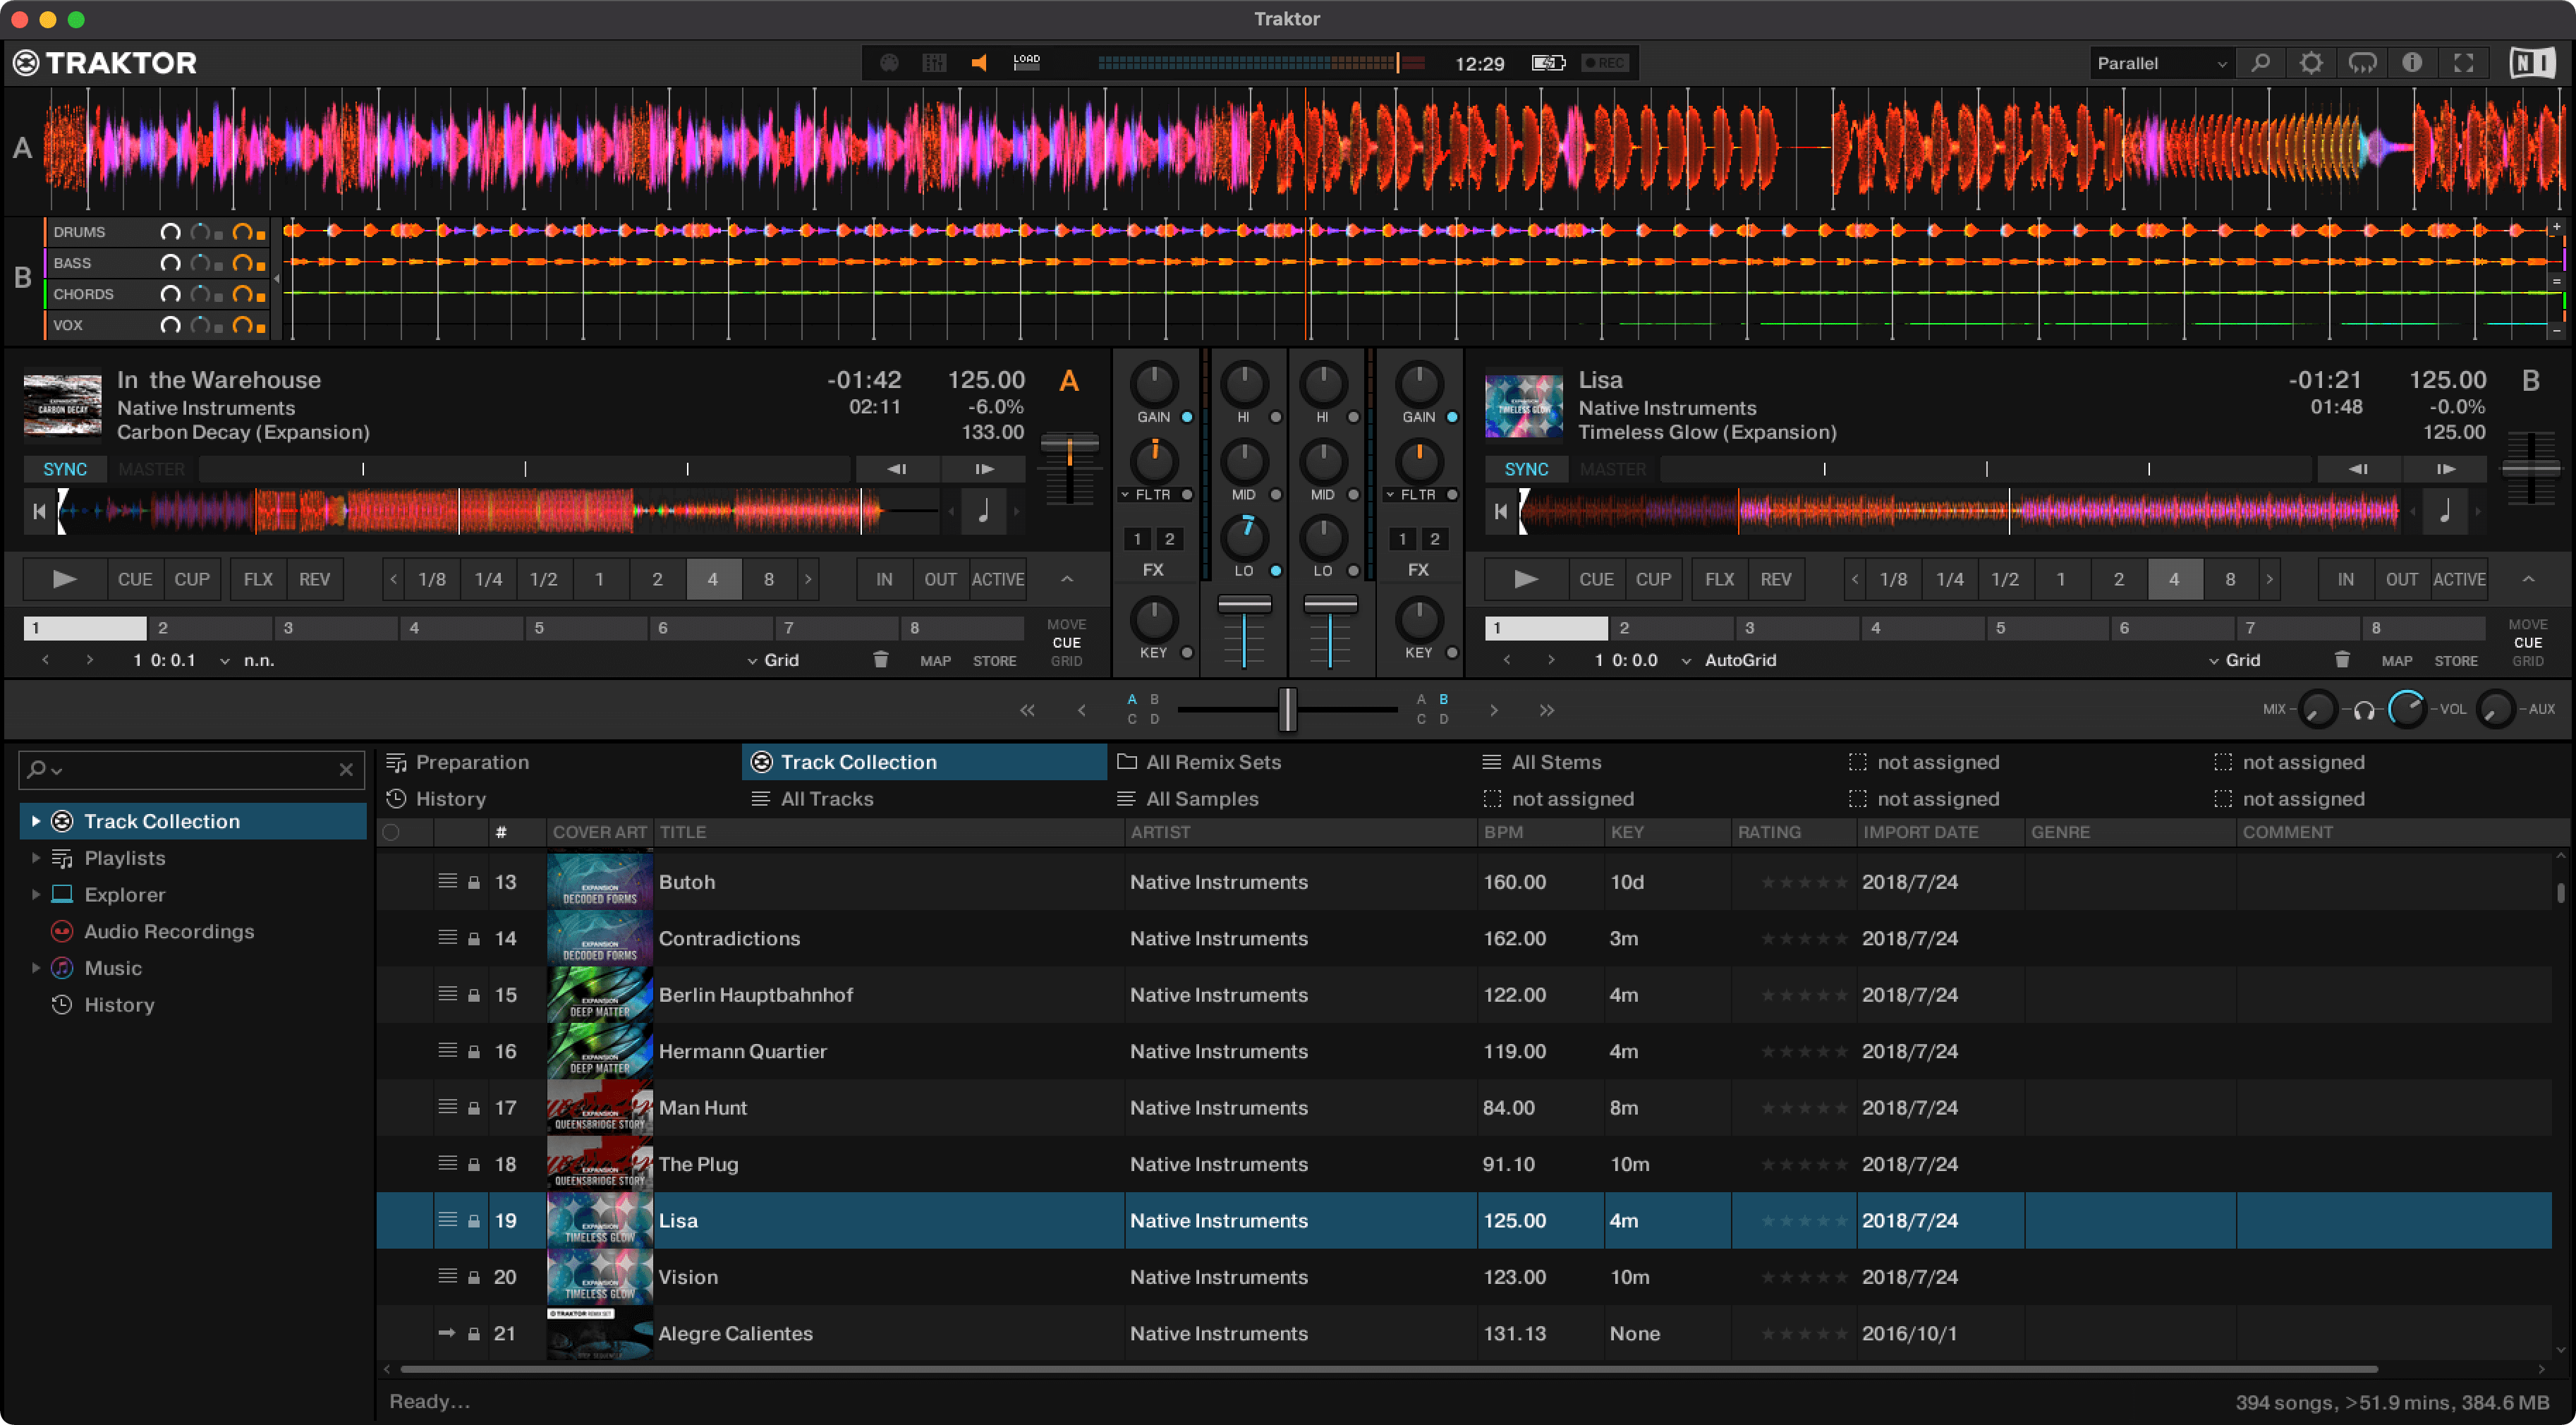 Getting Started with Traktor: Your Essential Guide - DJ Tech Reviews